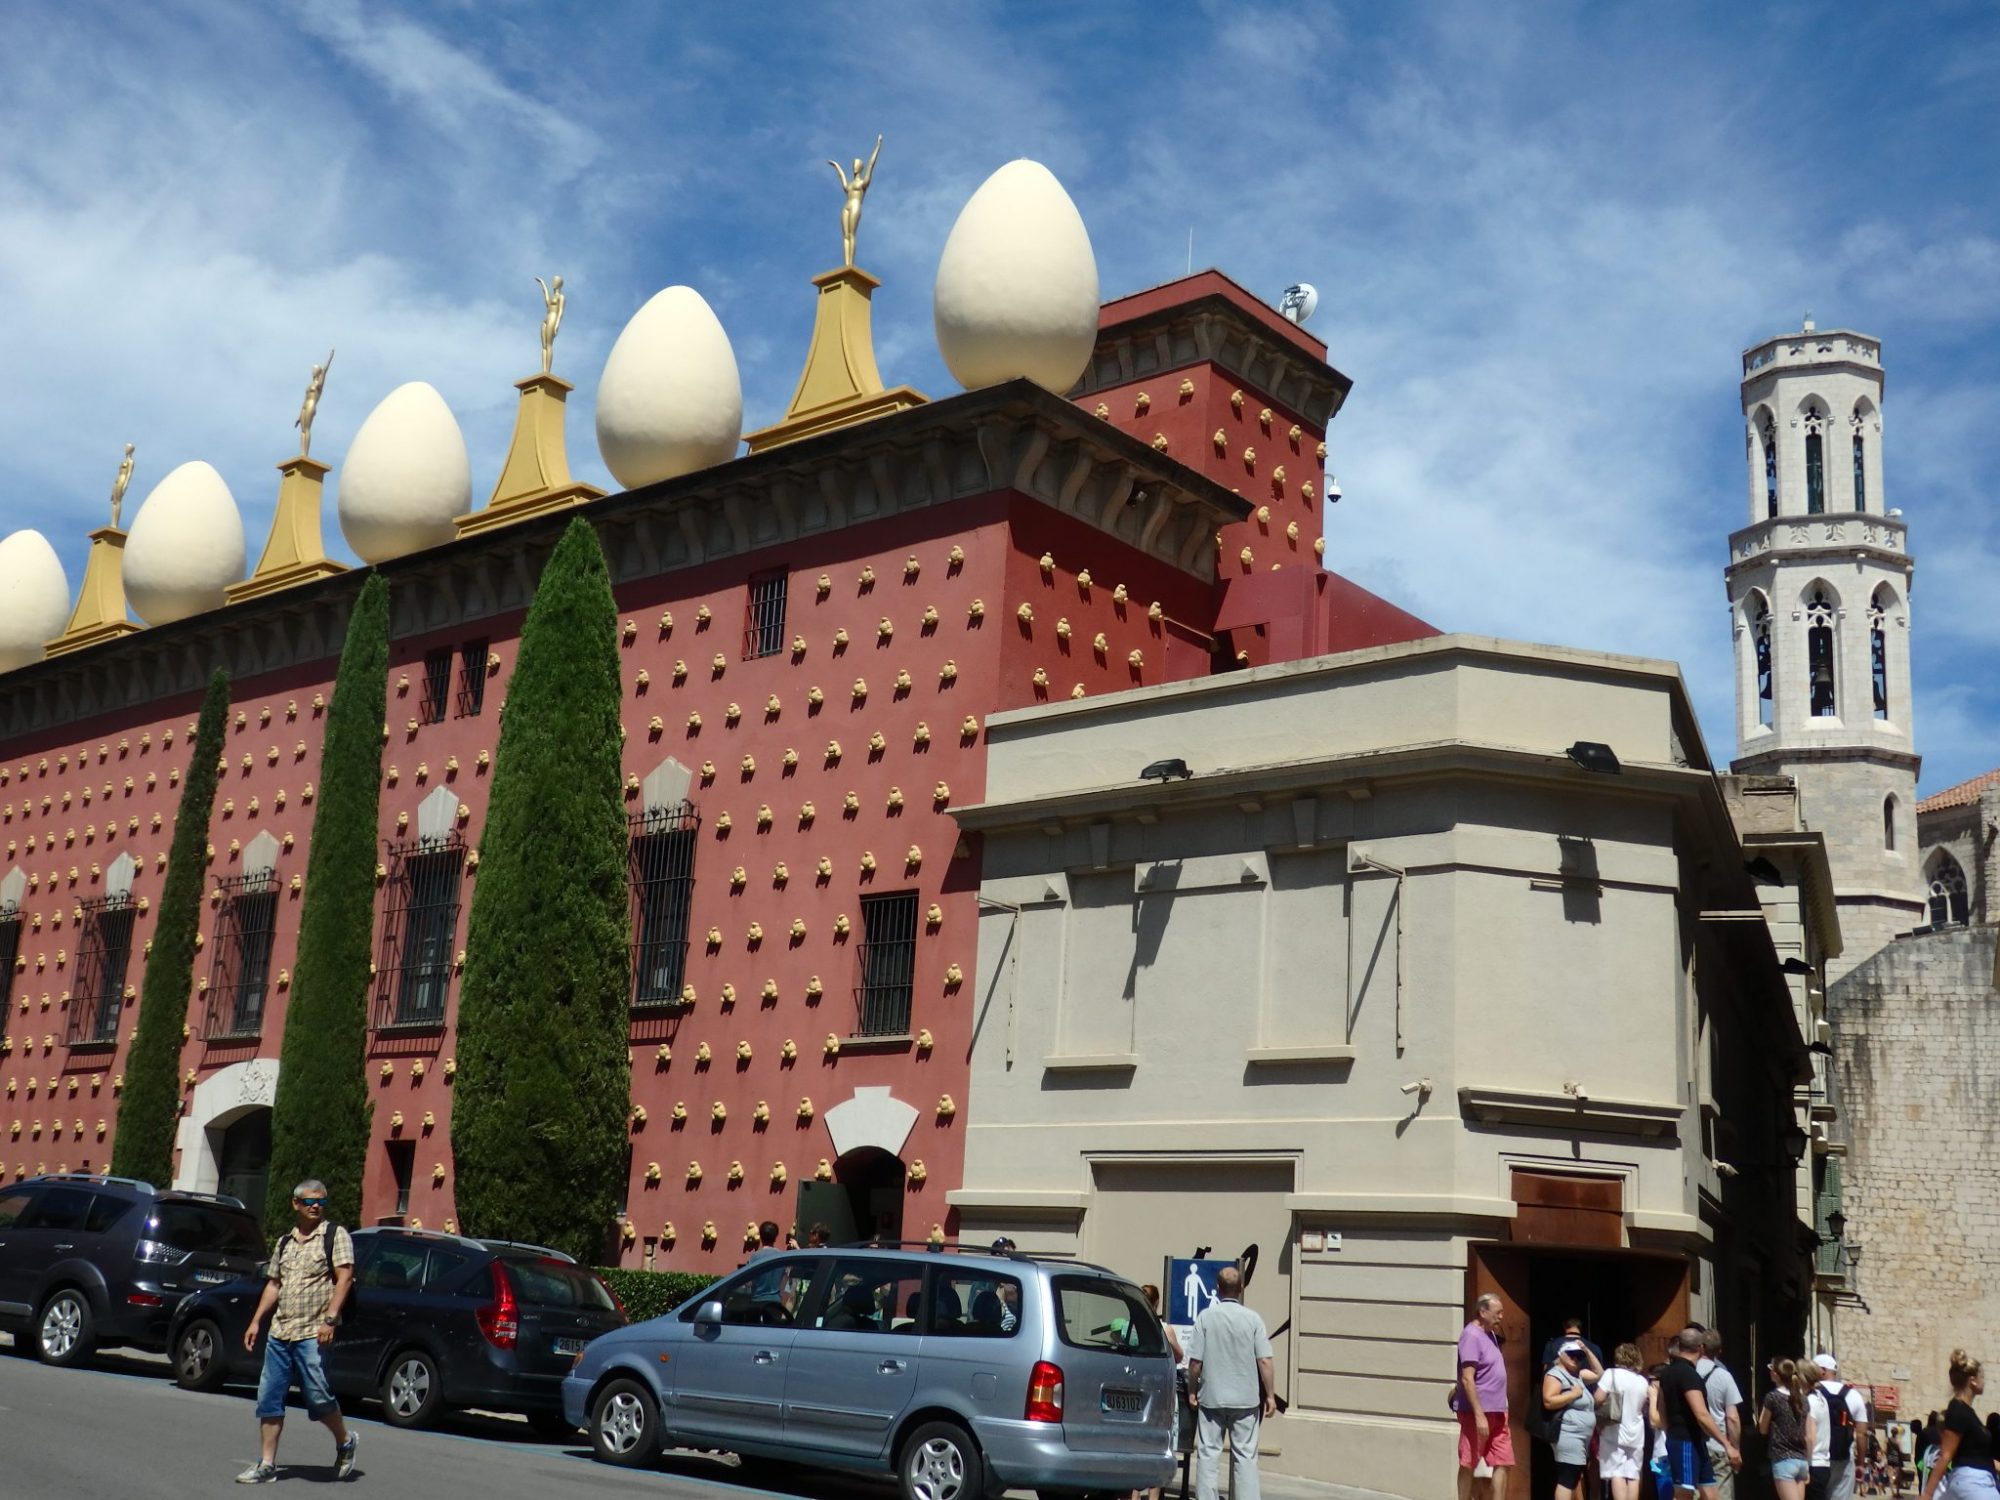 The outside of the building is dark red, with gold-colored bumps (actually a fat human figure from close up). Along the top is a row of large white eggs taller than a person. Between the eggs are a series of statues on pedestals painted gold.